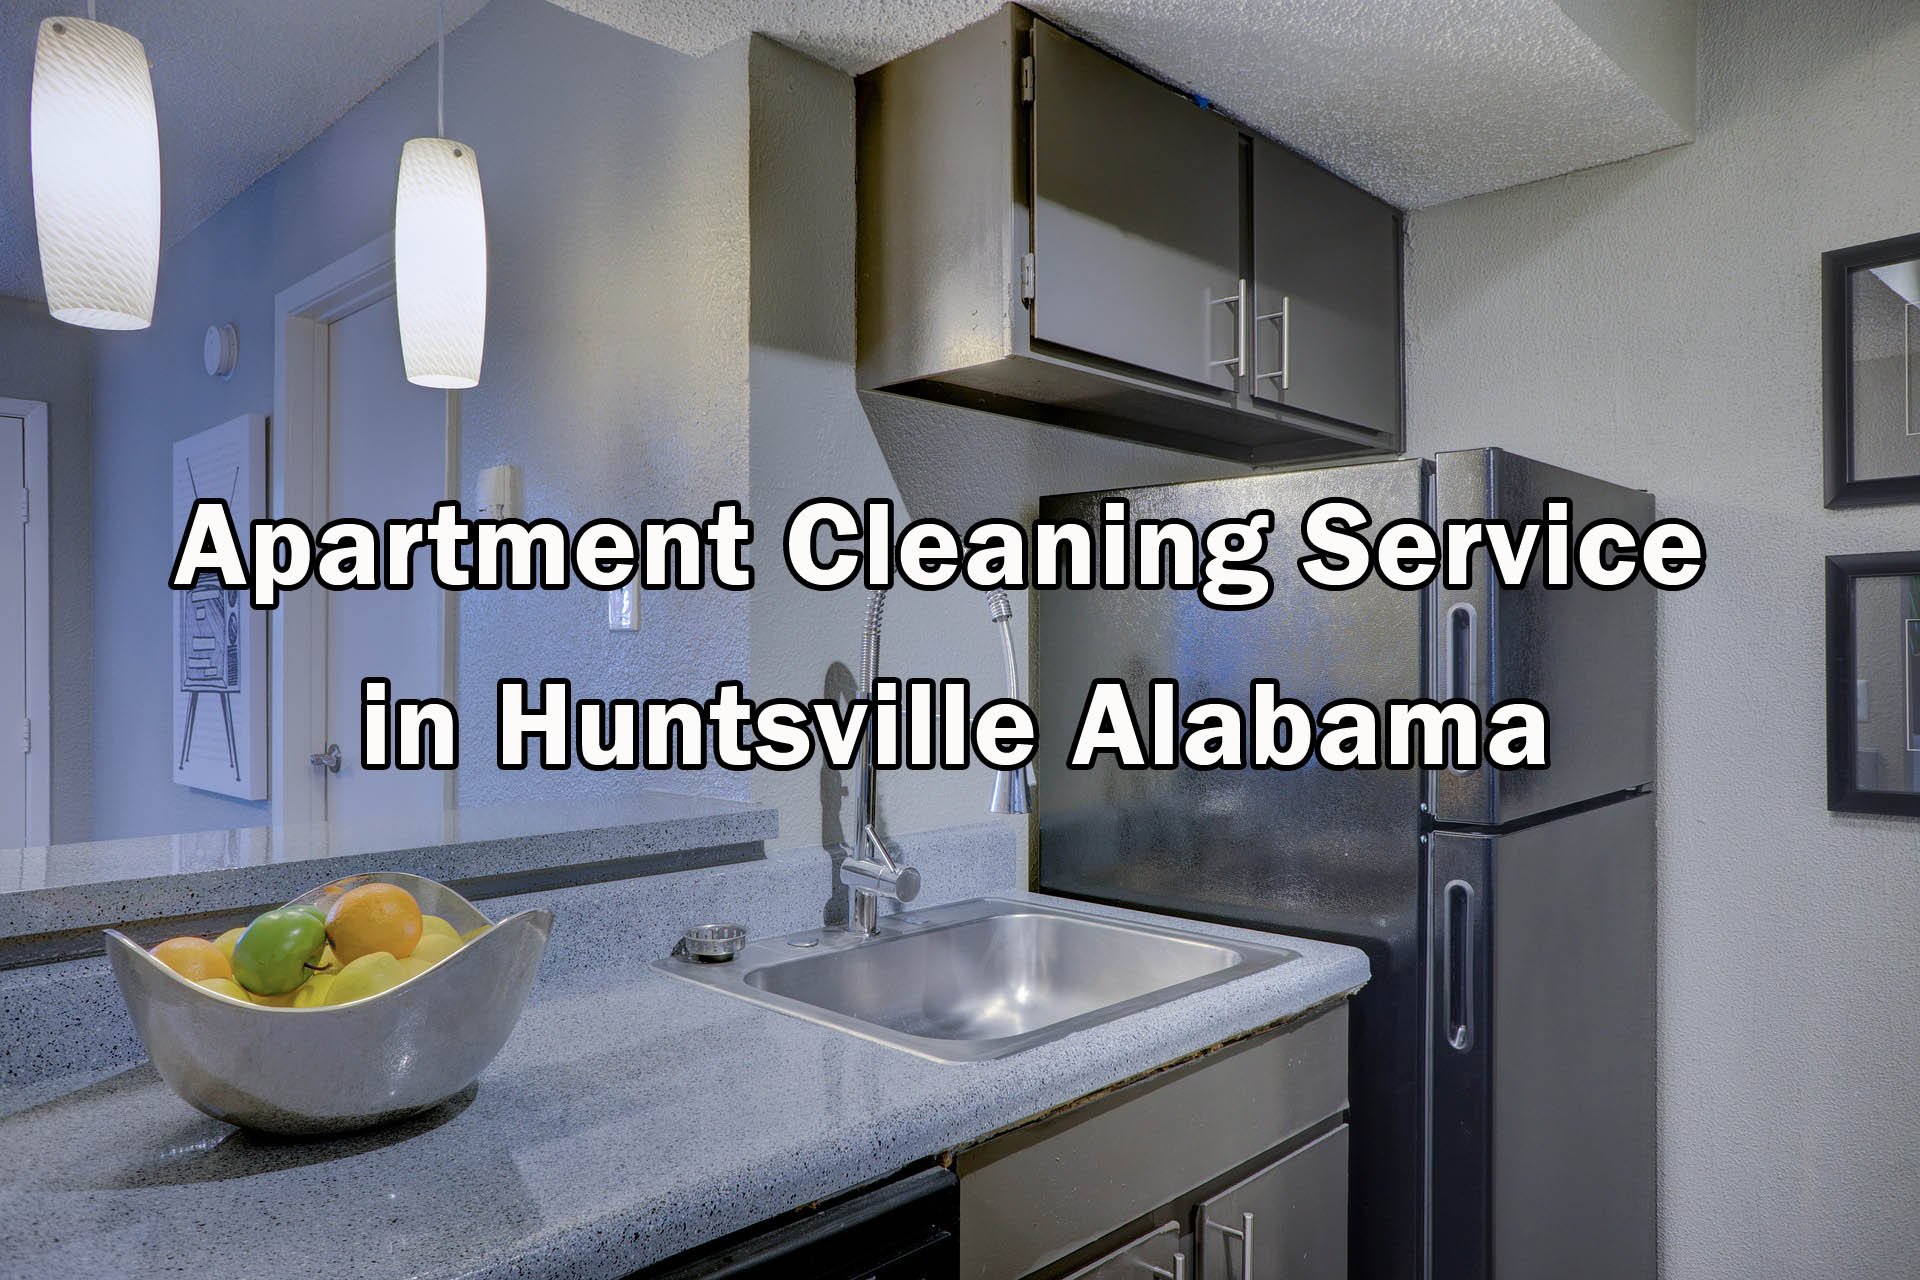 Apartment Cleaning Service in Huntsville Alabama